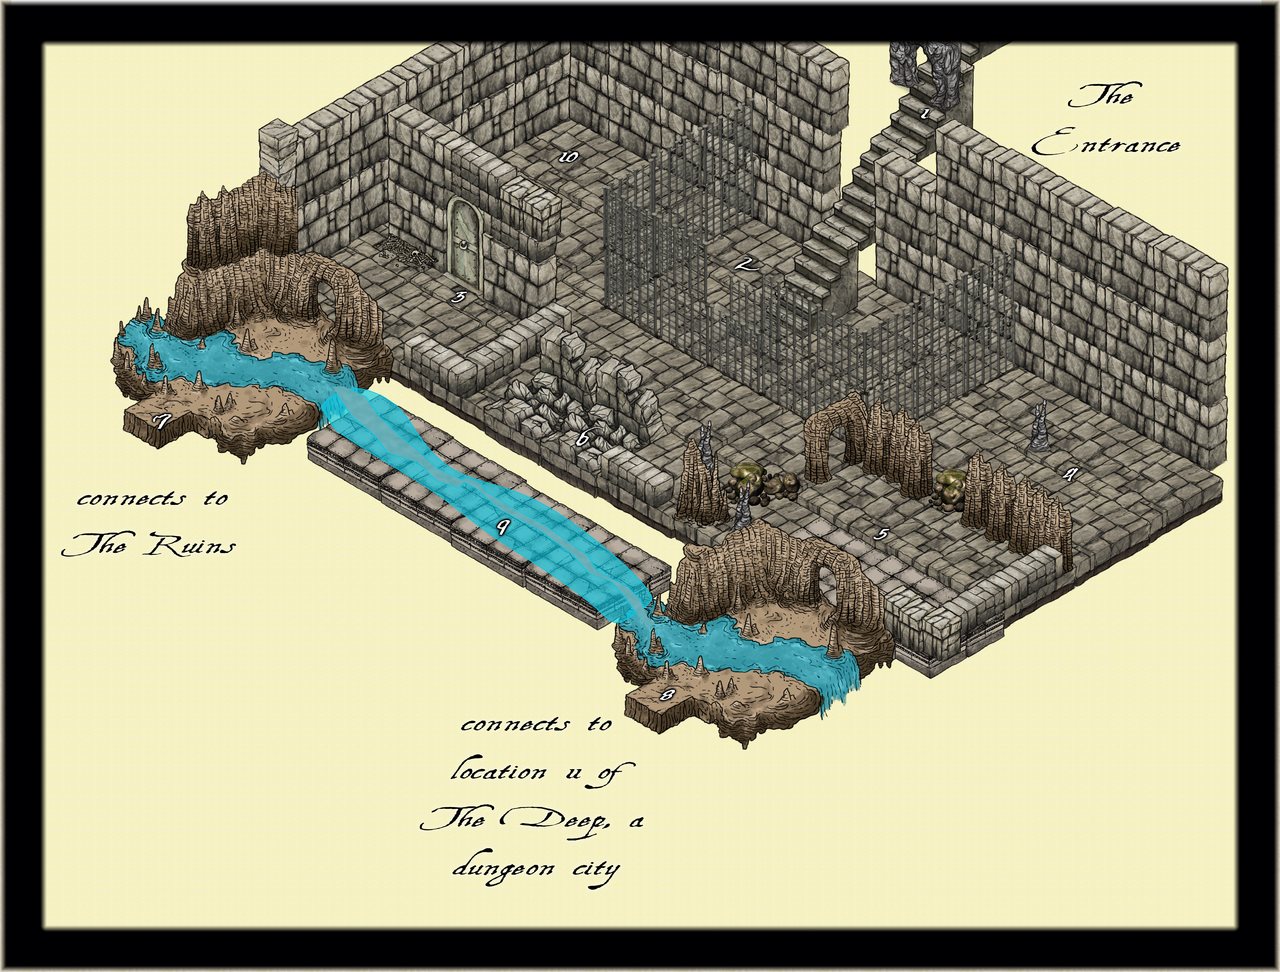 Nibirum Map: dungeon city entrance by JimP